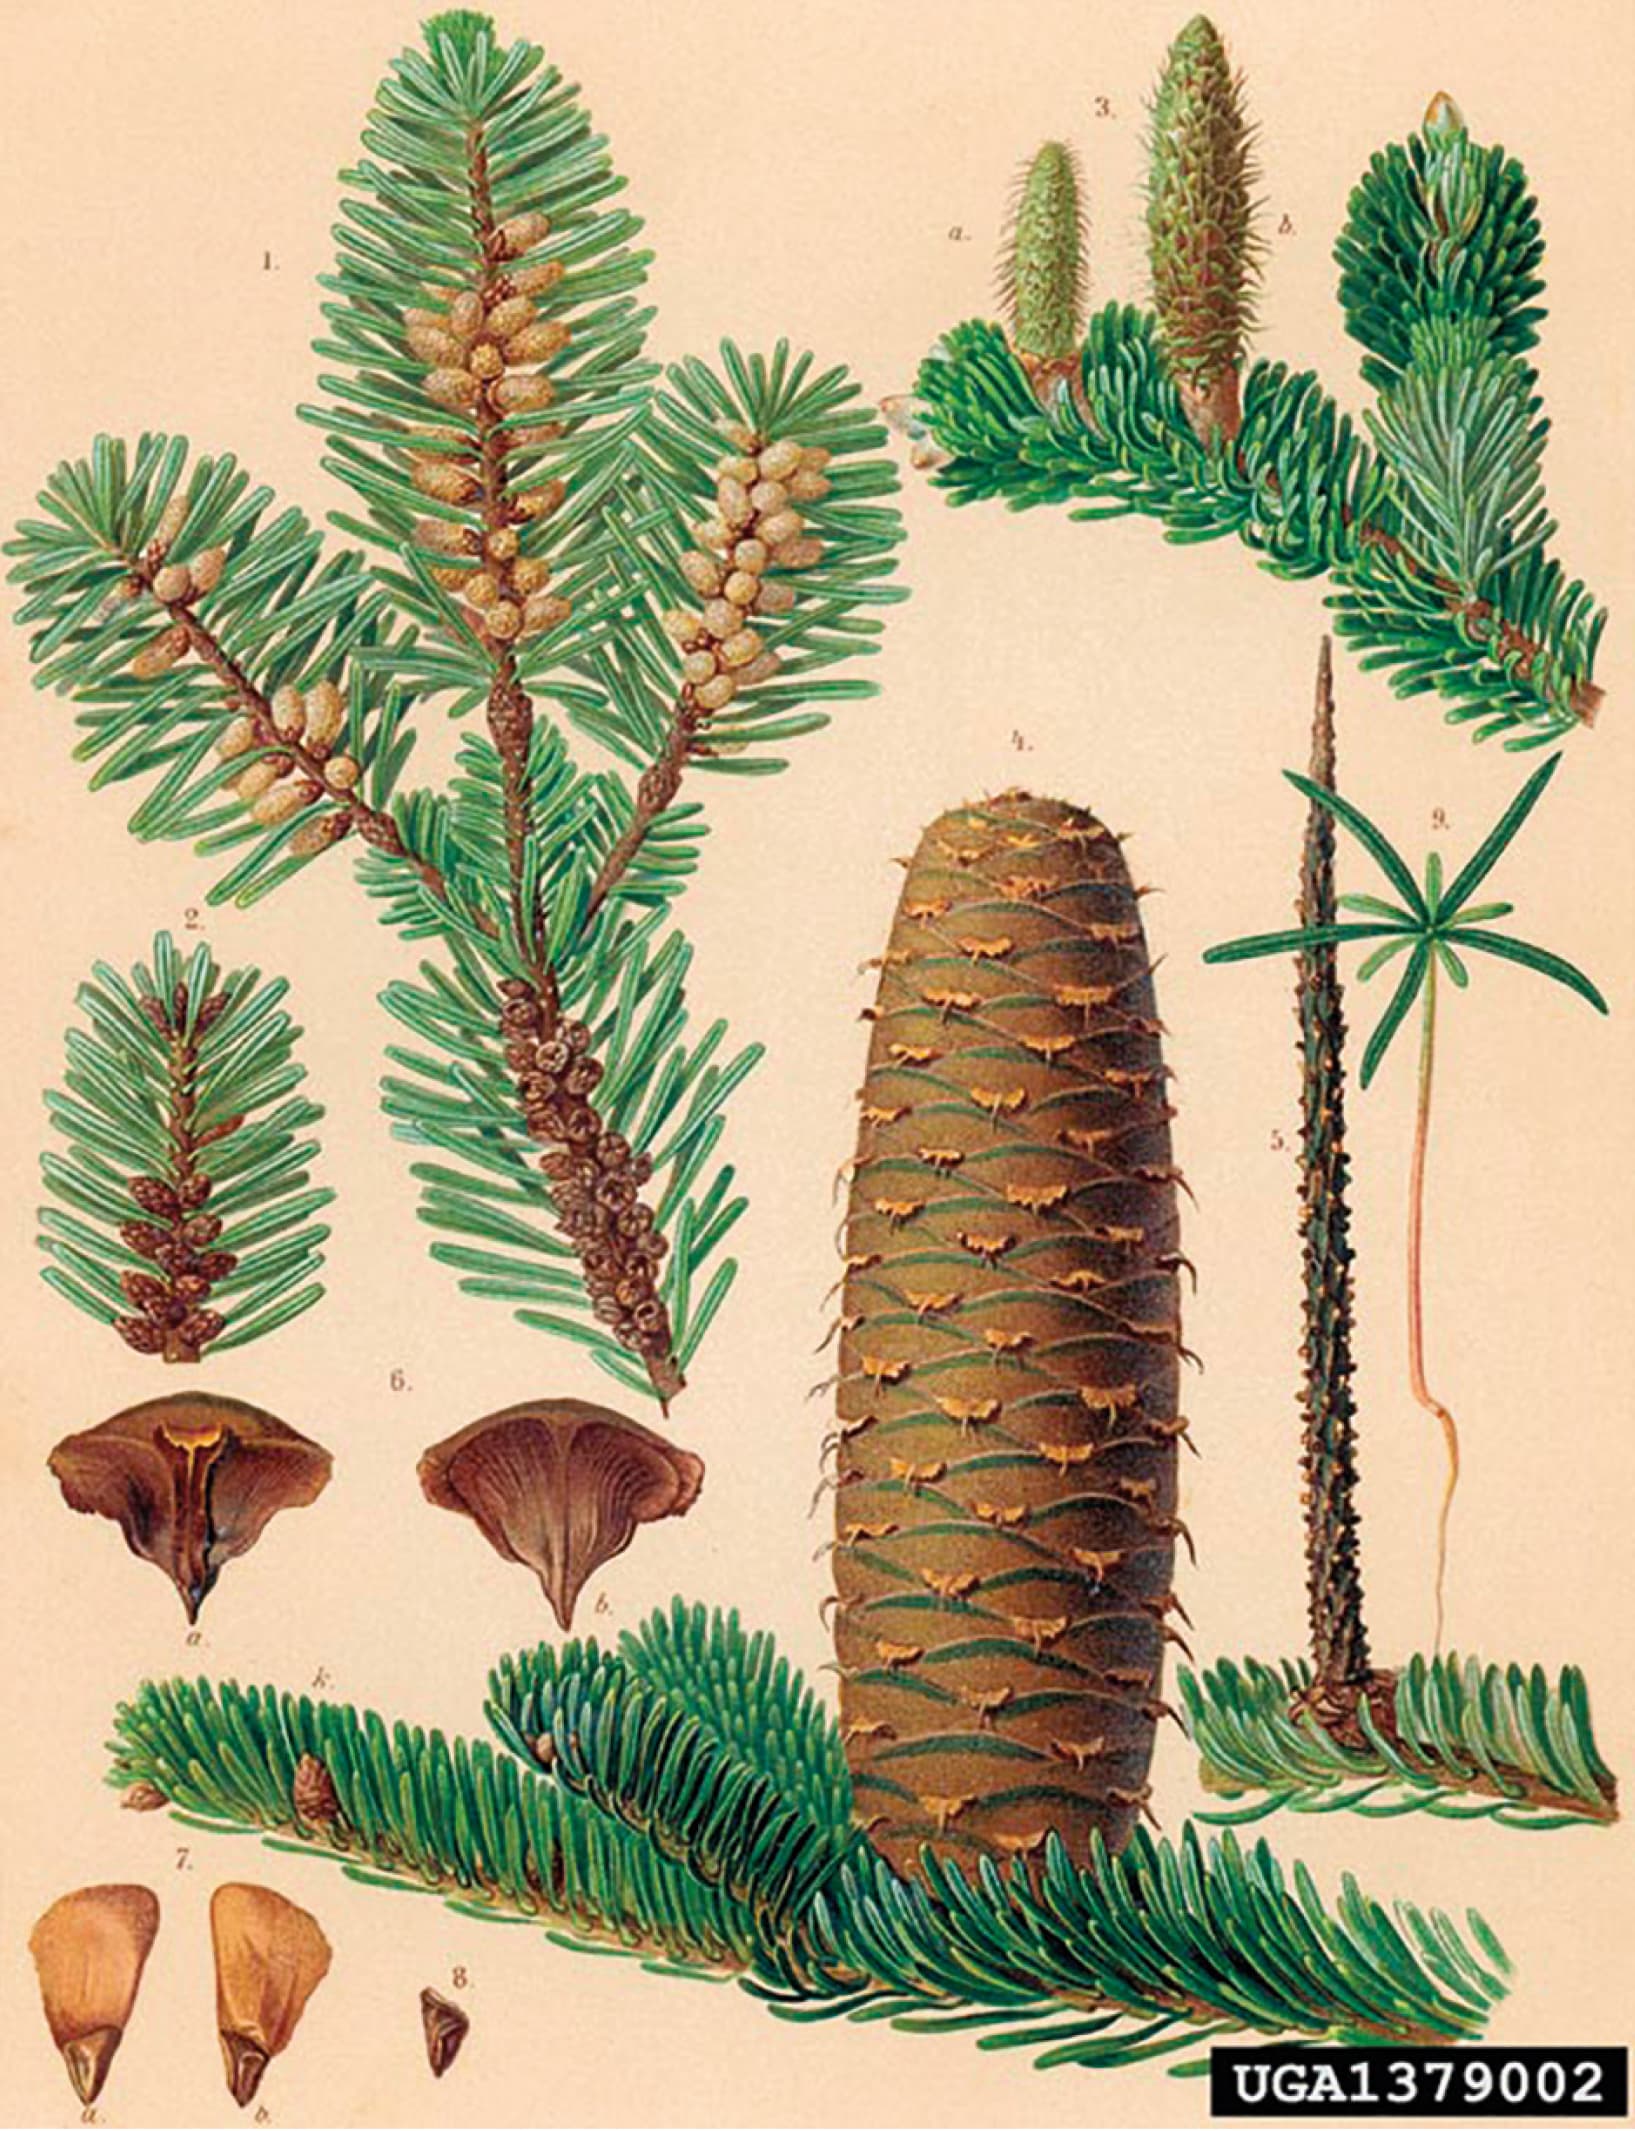 Common identification features of Abies. (Source: Zelimir Borzan, University of Zagreb, Bugwood.org)